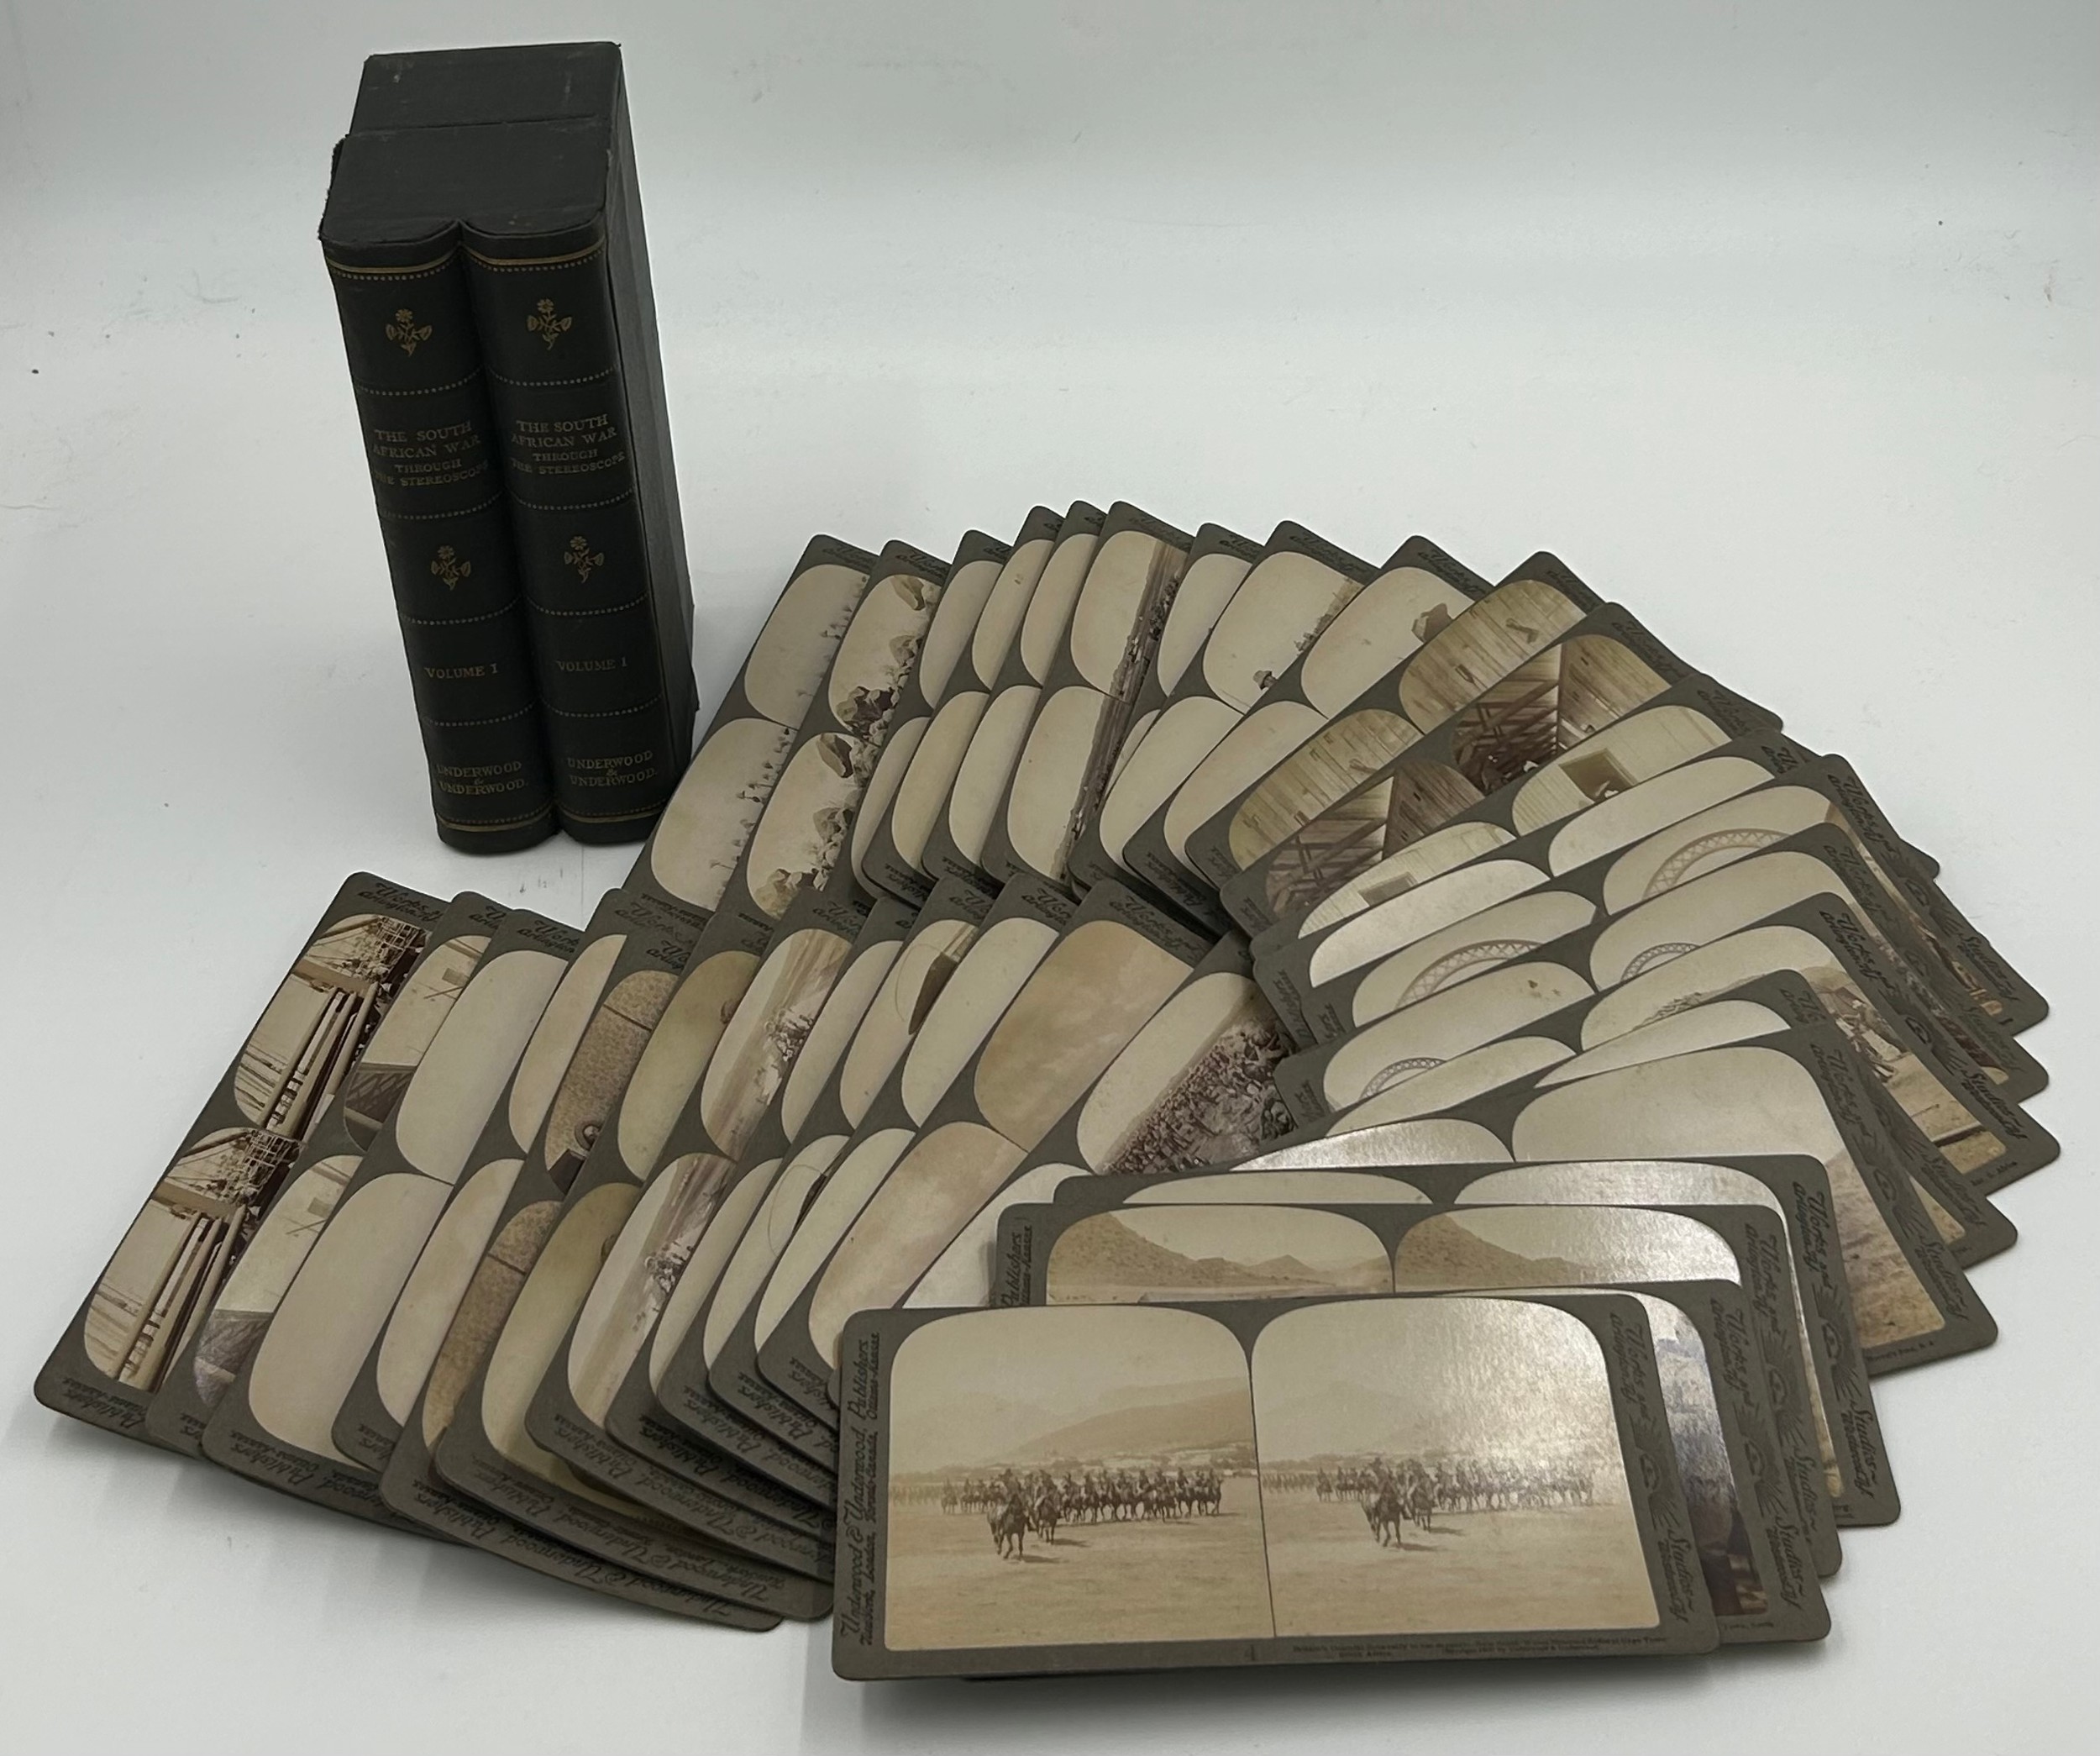 Boer War Interest. 'The South African War through the Stereoscope' Volume 1 in original fitted box